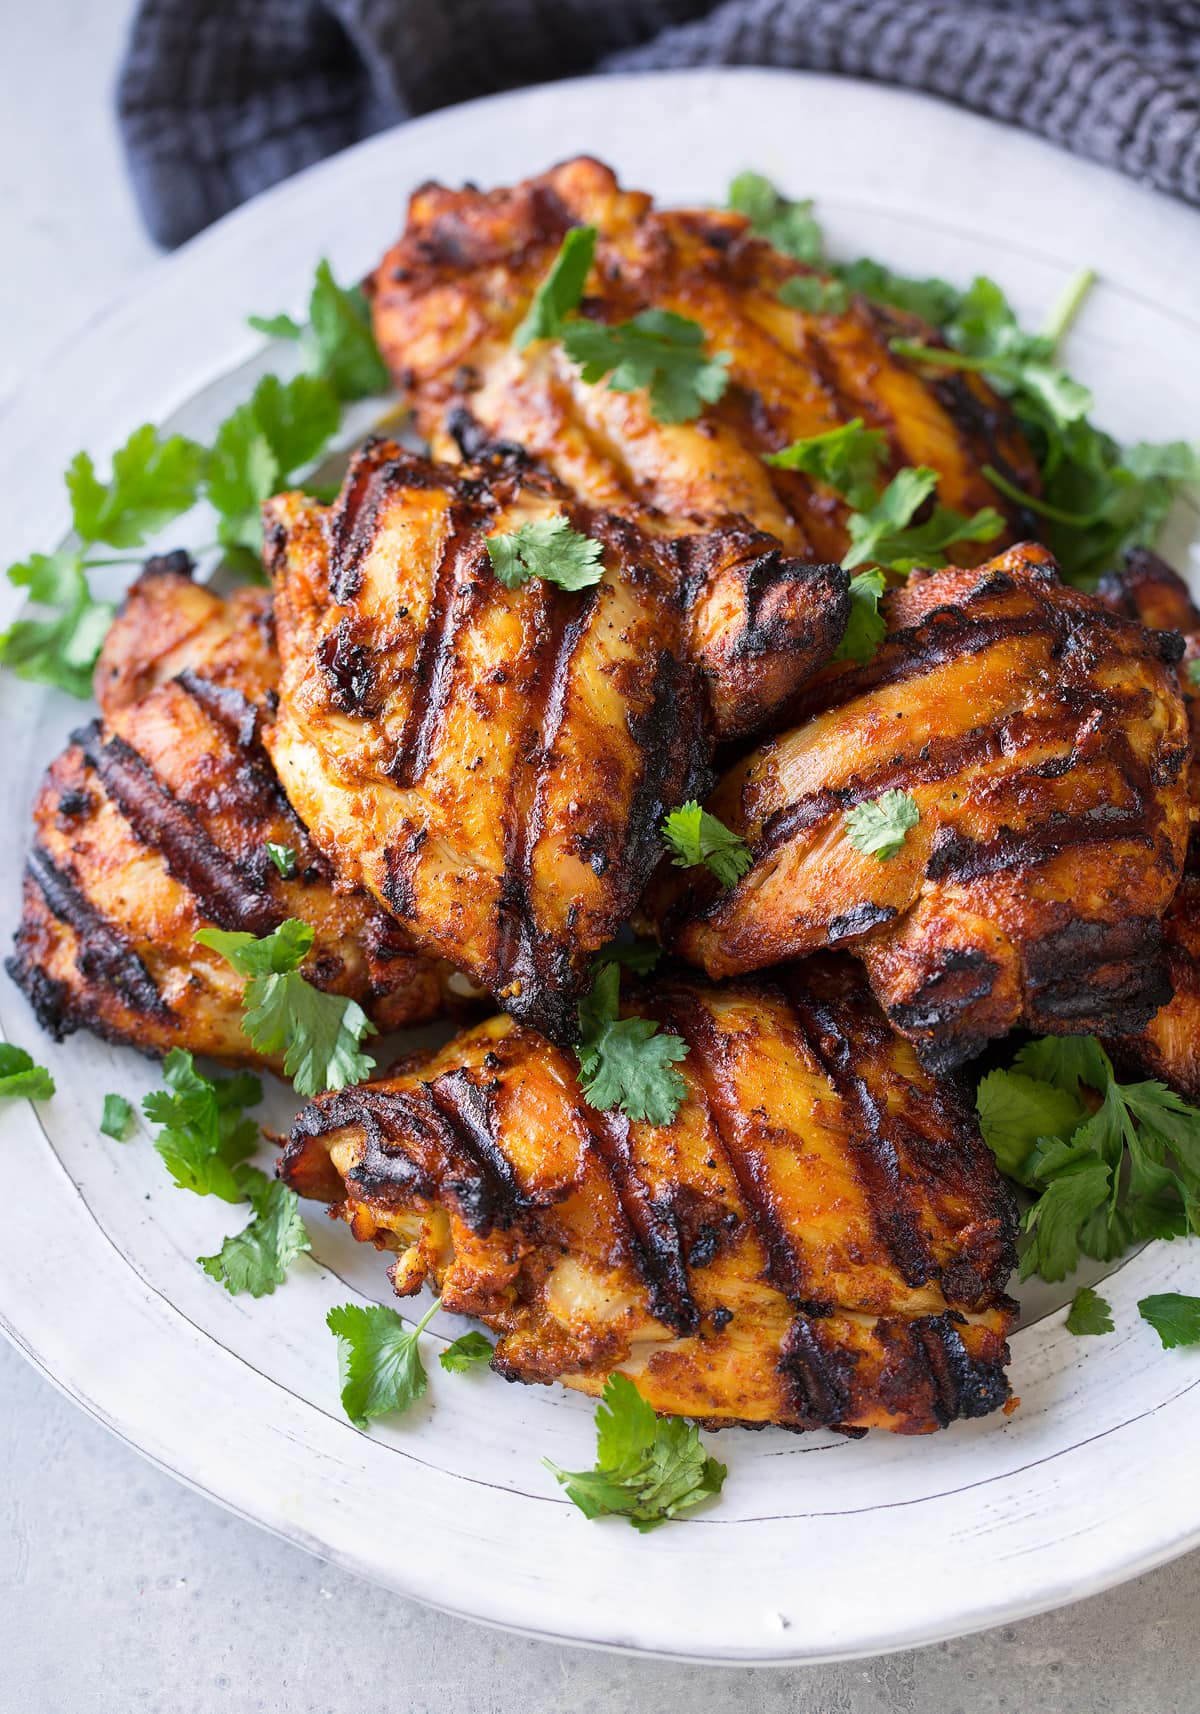 Tandoori Chicken Grill Or Oven Method Cooking Classy,What Is Fondant Icing